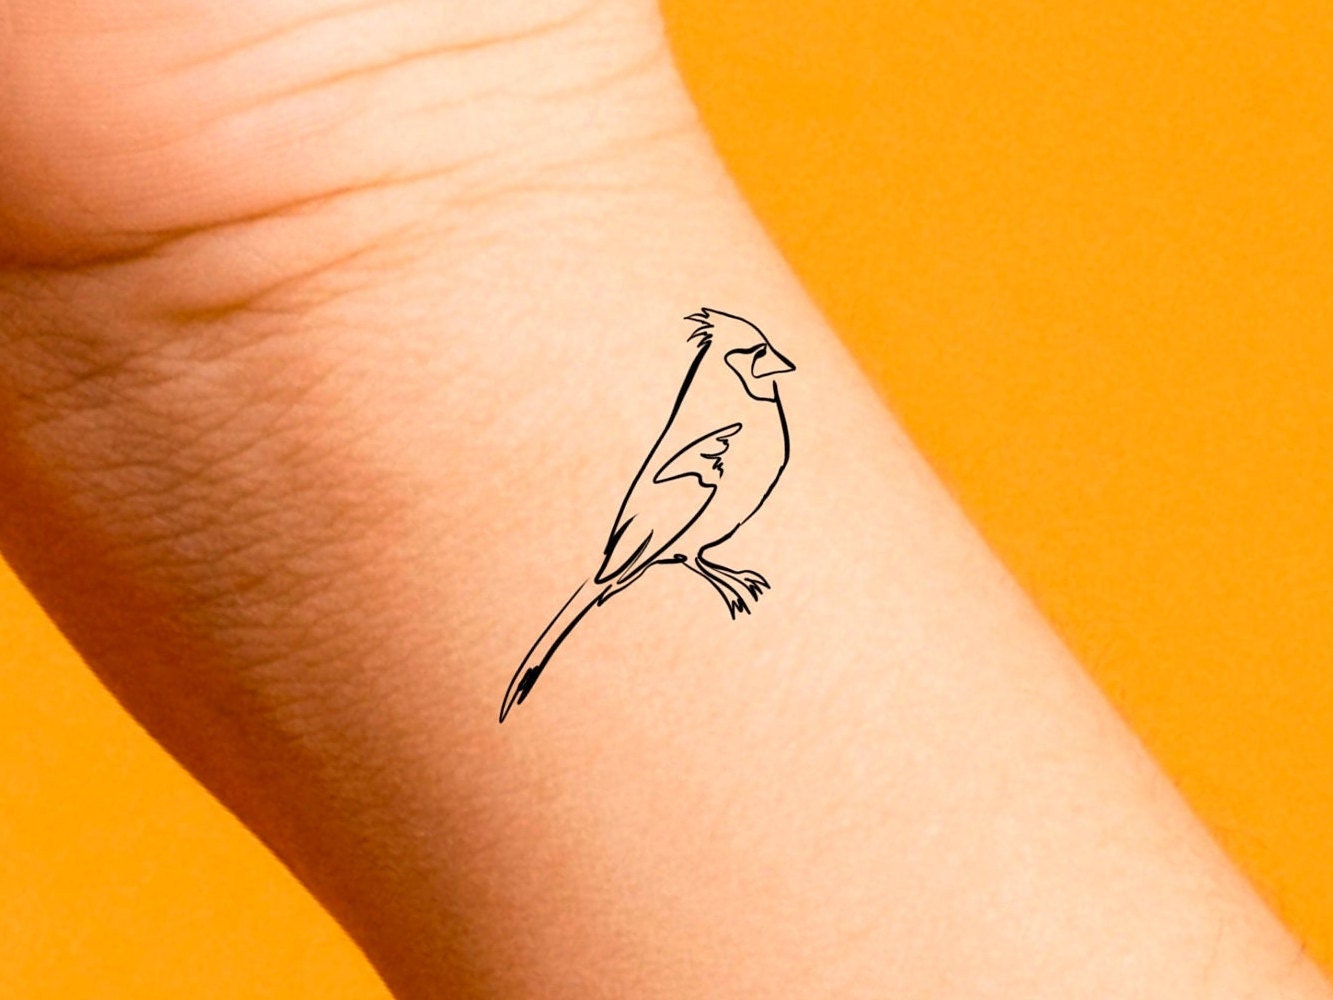 1. "Cardinal Tattoo Designs: A Symbol of Love and Loyalty" - wide 2